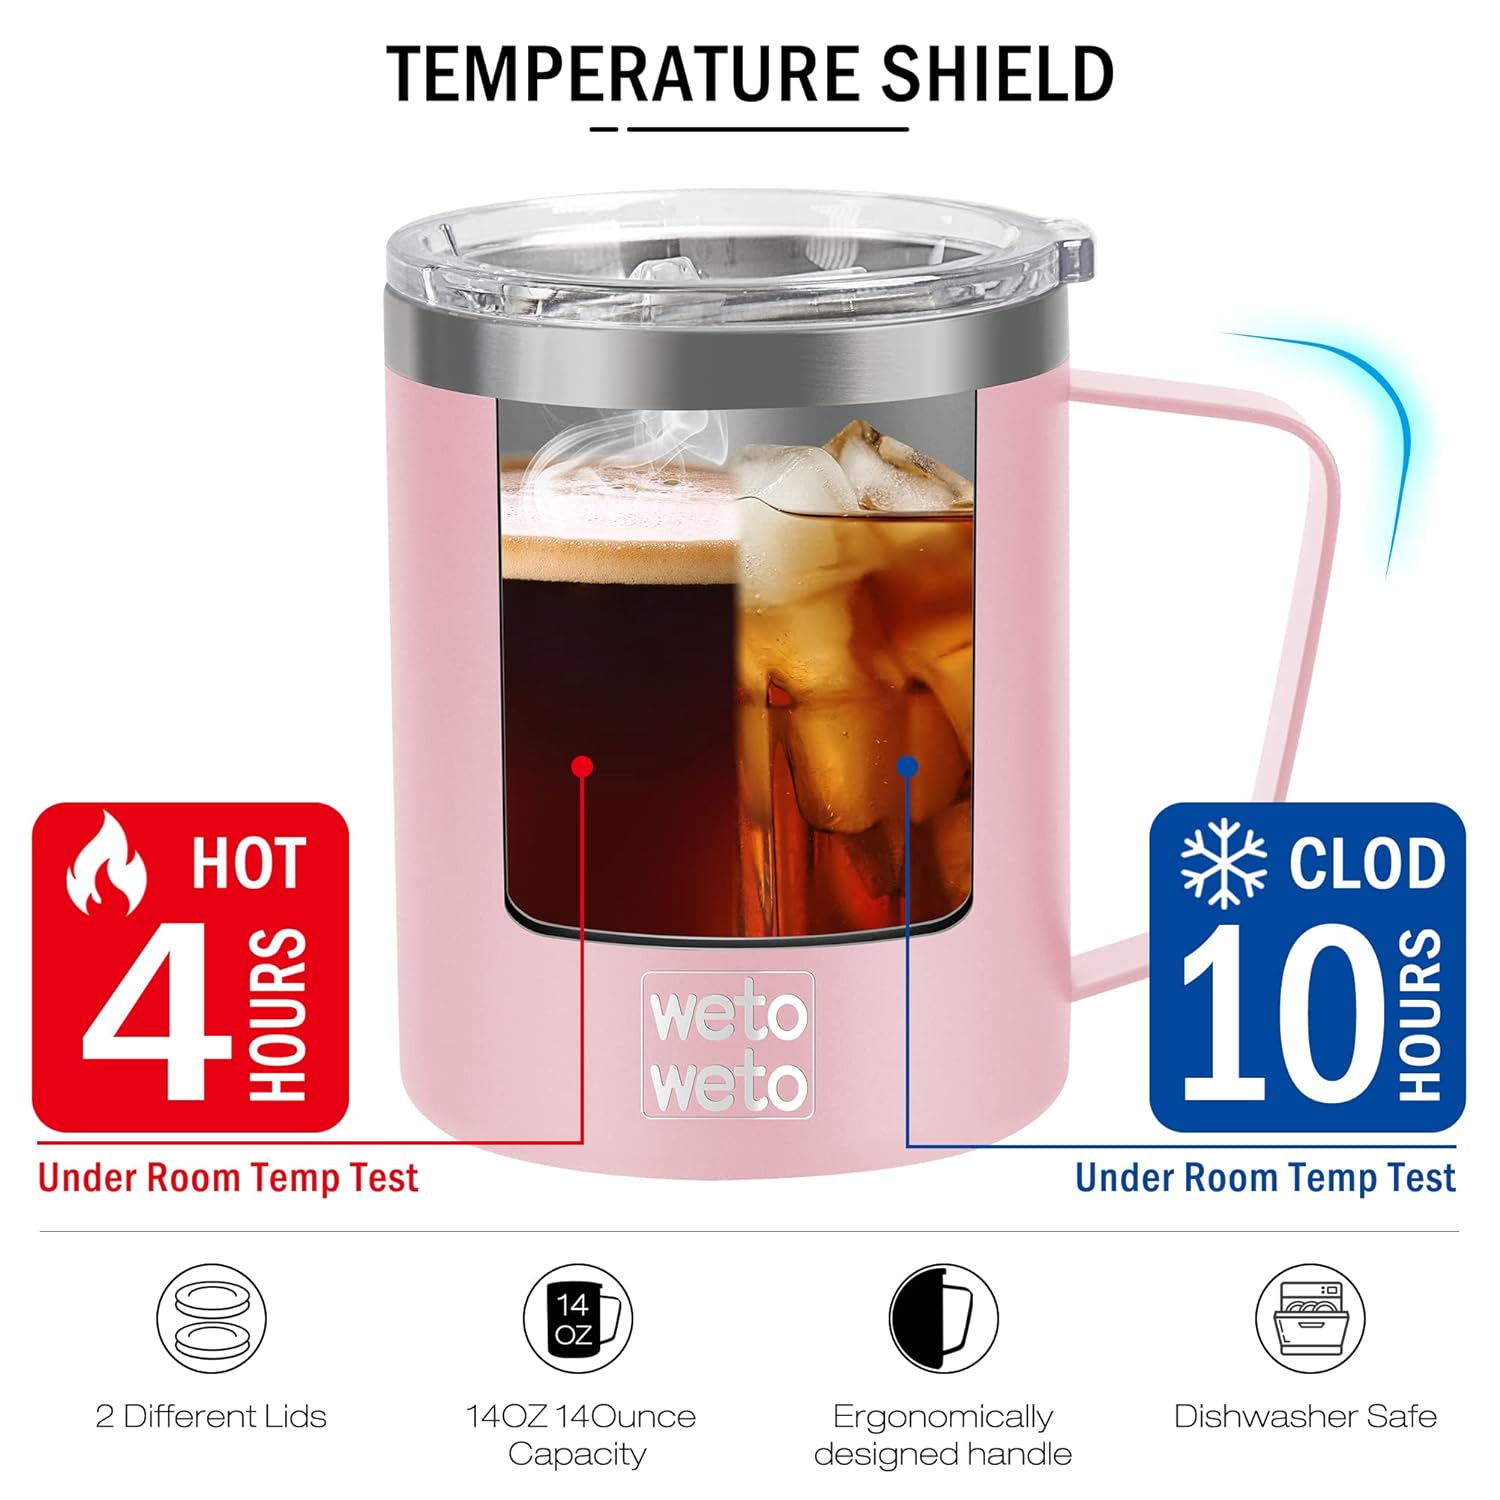 WETOWETO 14 oz Coffee Mug, Vacuum Insulated Camping Mug with Lid, Double Wall Stainless Steel Travel Tumbler Cup, Coffee Thermos Outdoor, Powder Coated Ice Pink